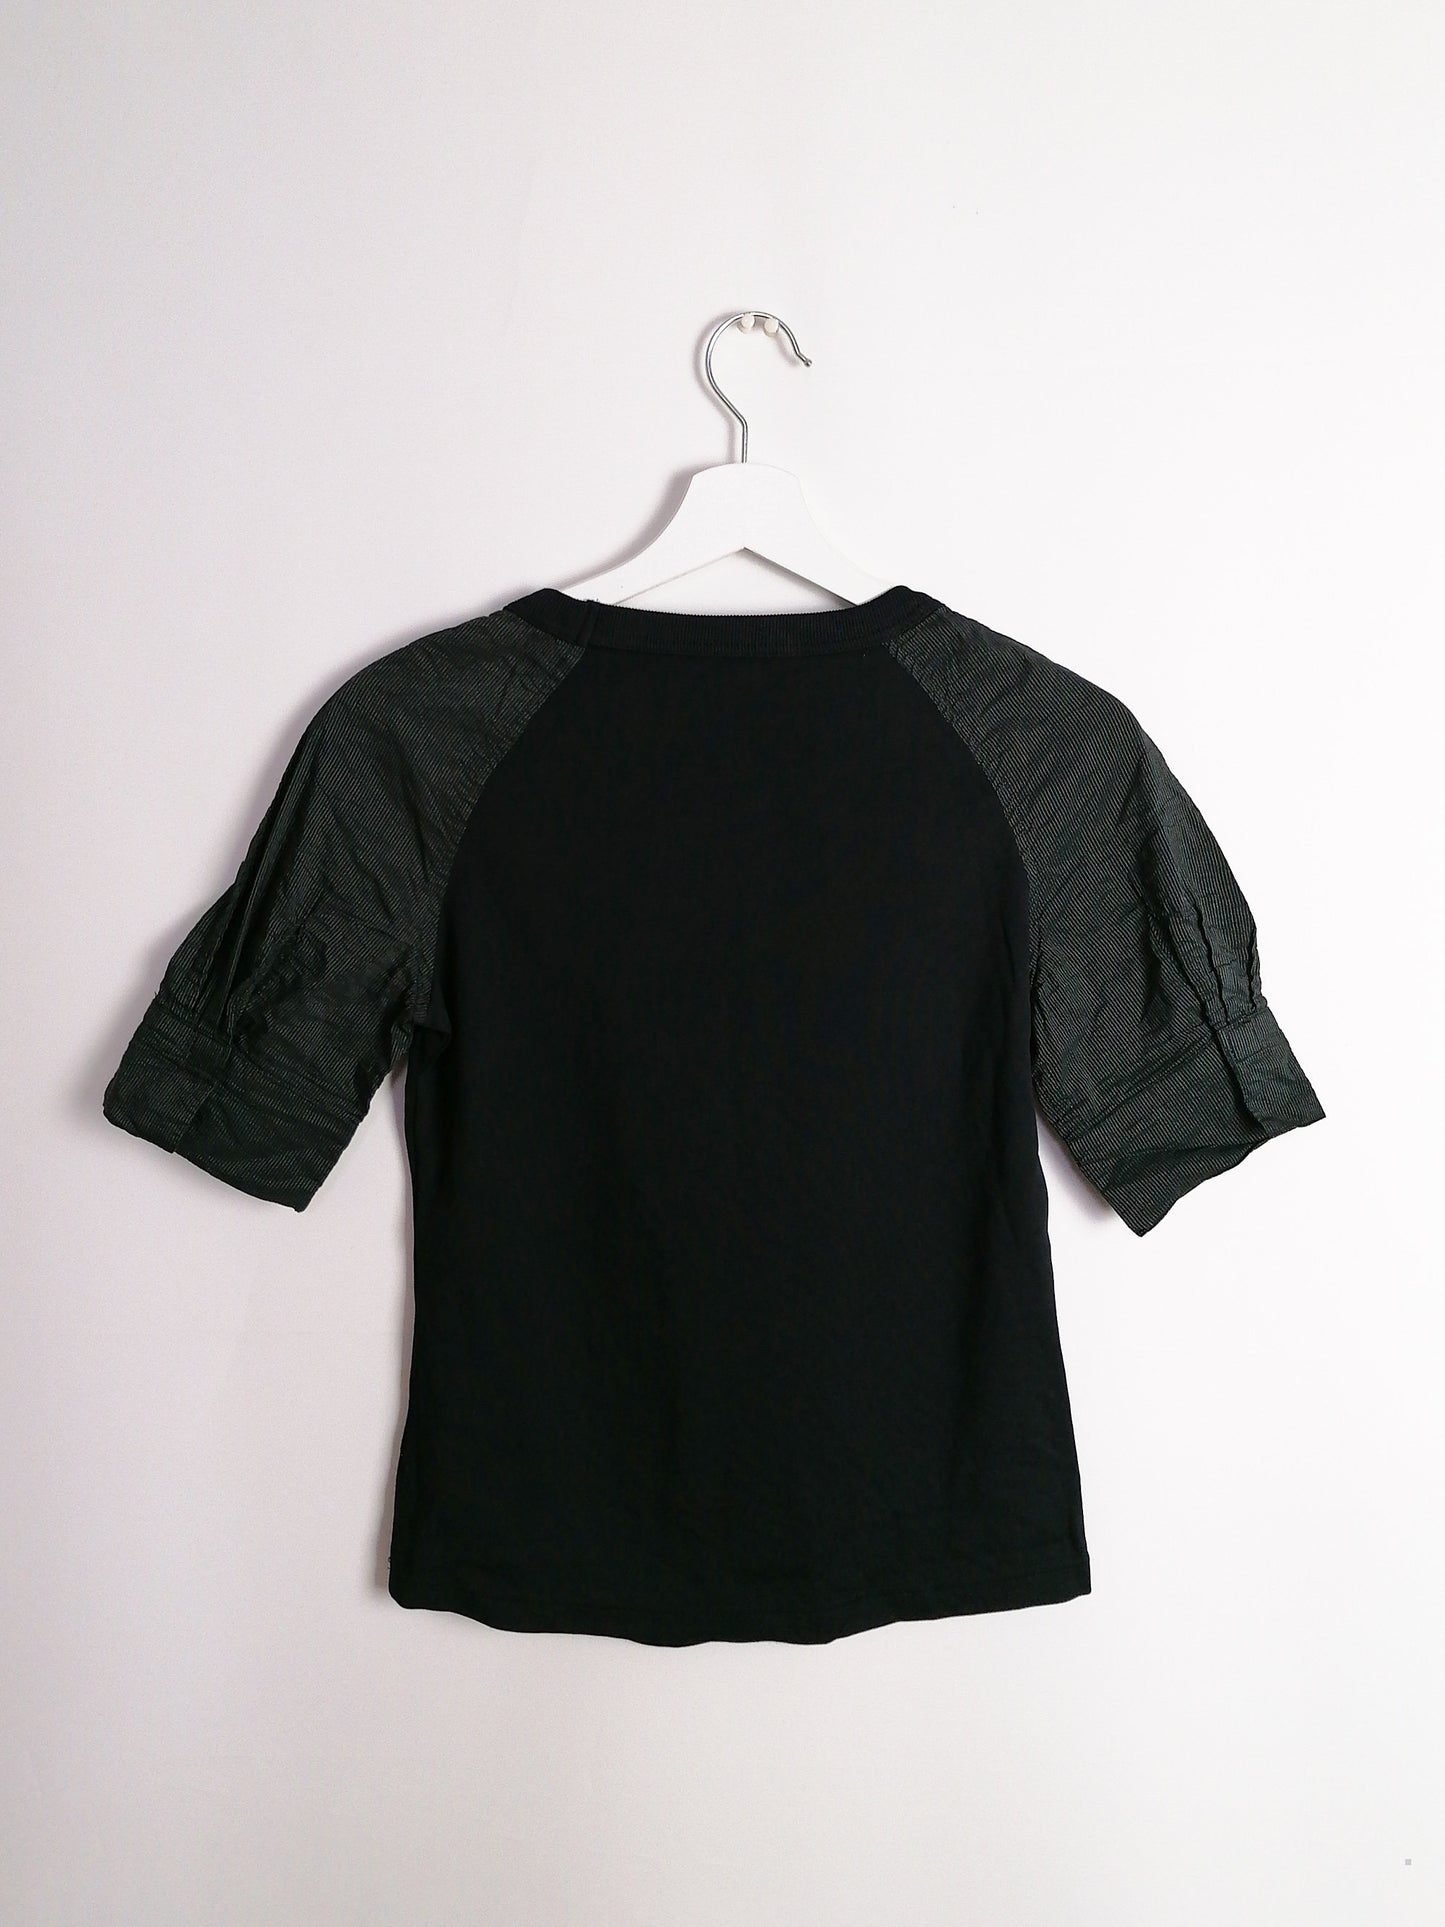 MARC CAIN Puffy Sleeves Top in Black - size XS-S